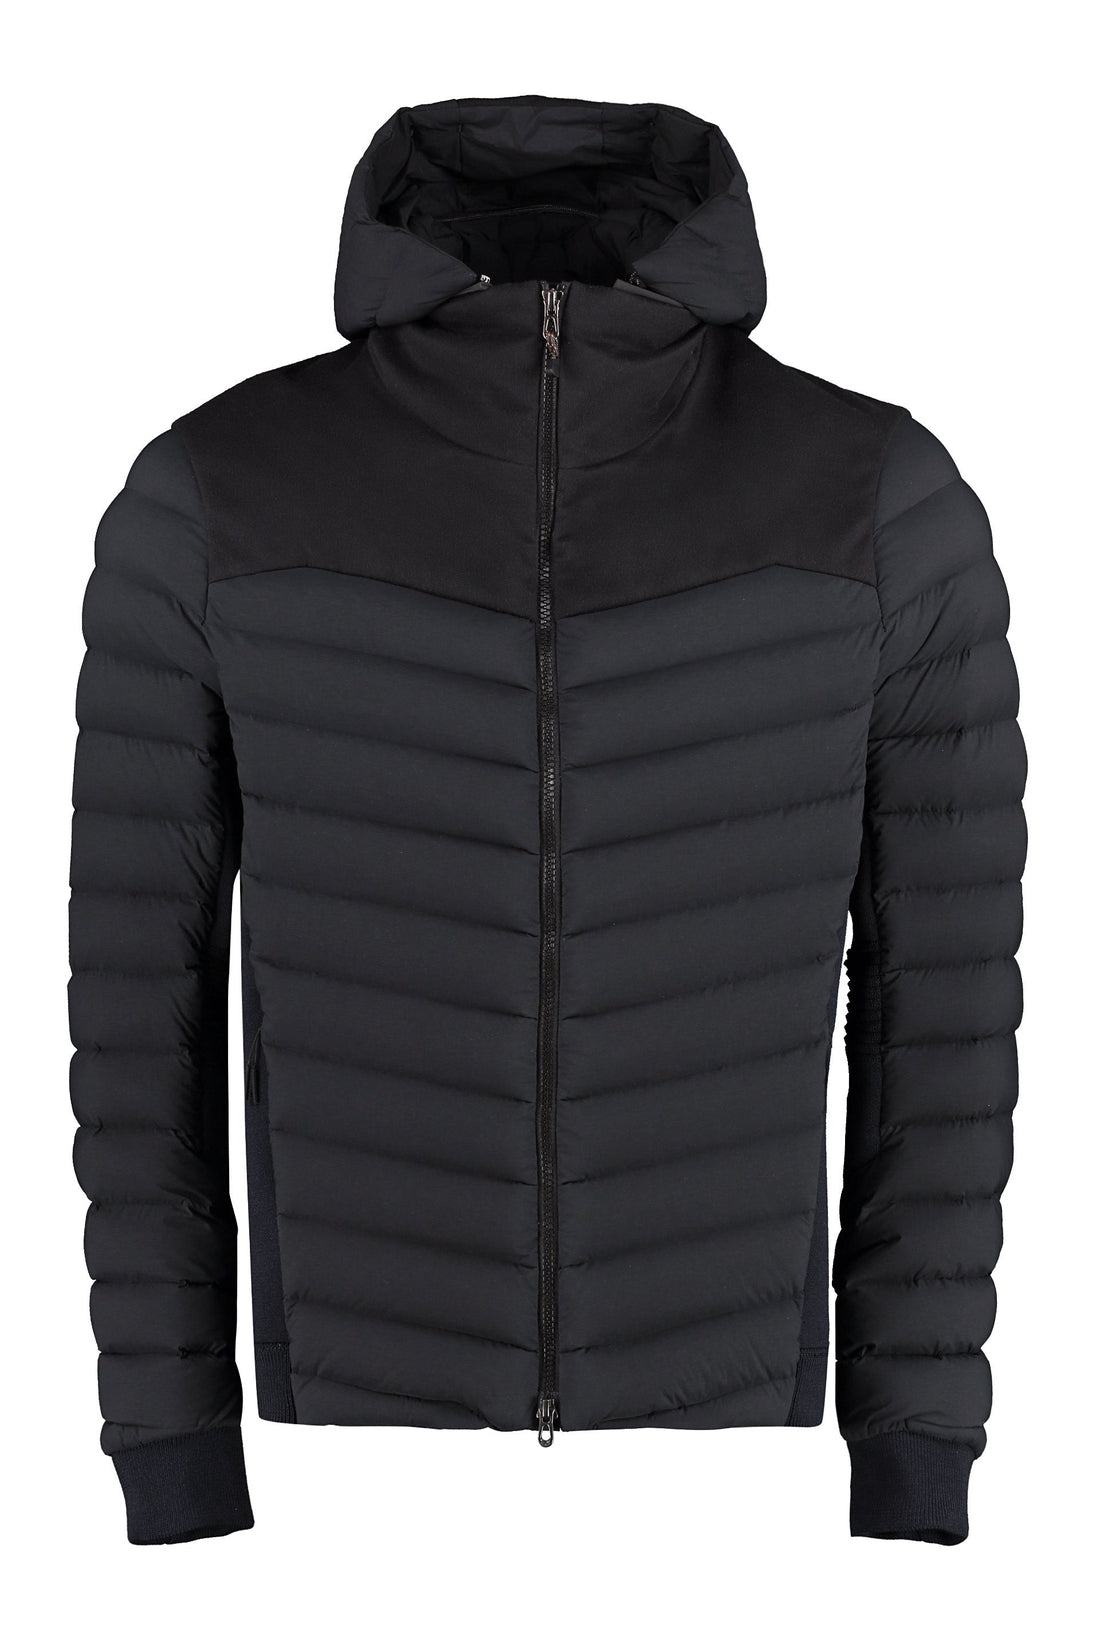 Sease-OUTLET-SALE-Hooded down jacket-ARCHIVIST